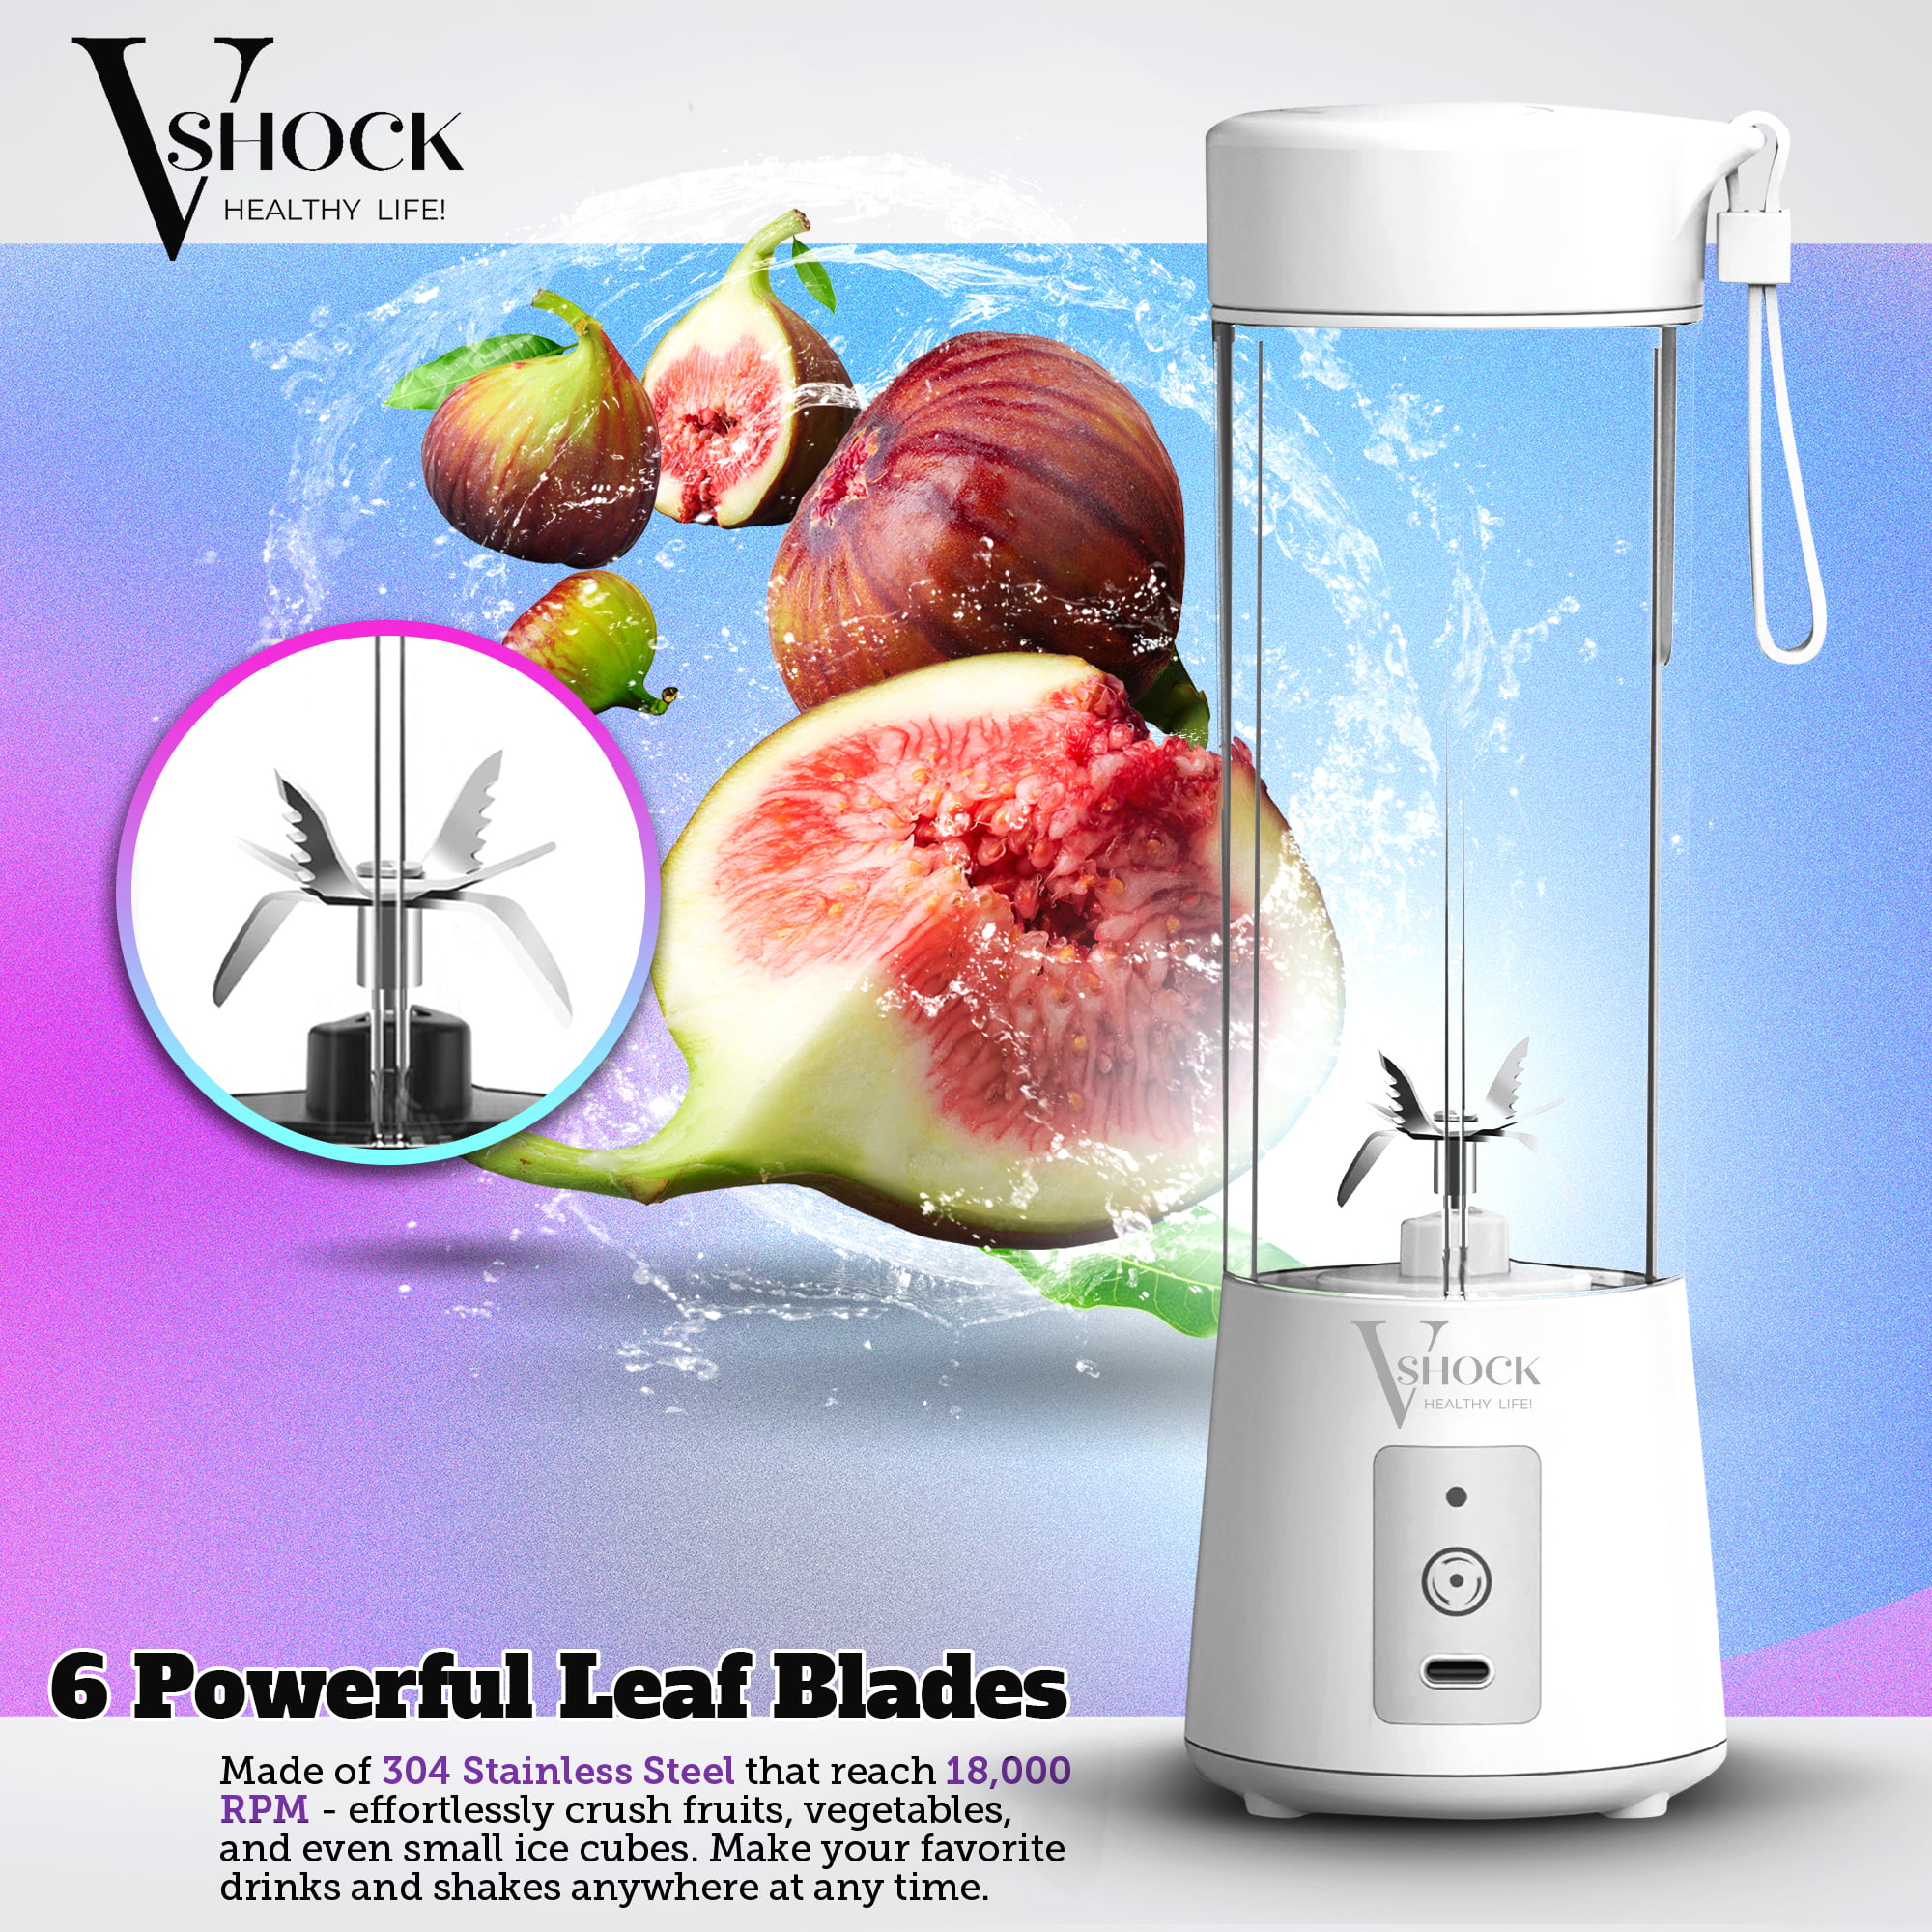 5 CORE Personal Blender for Shakes and Smoothies Portable Blender